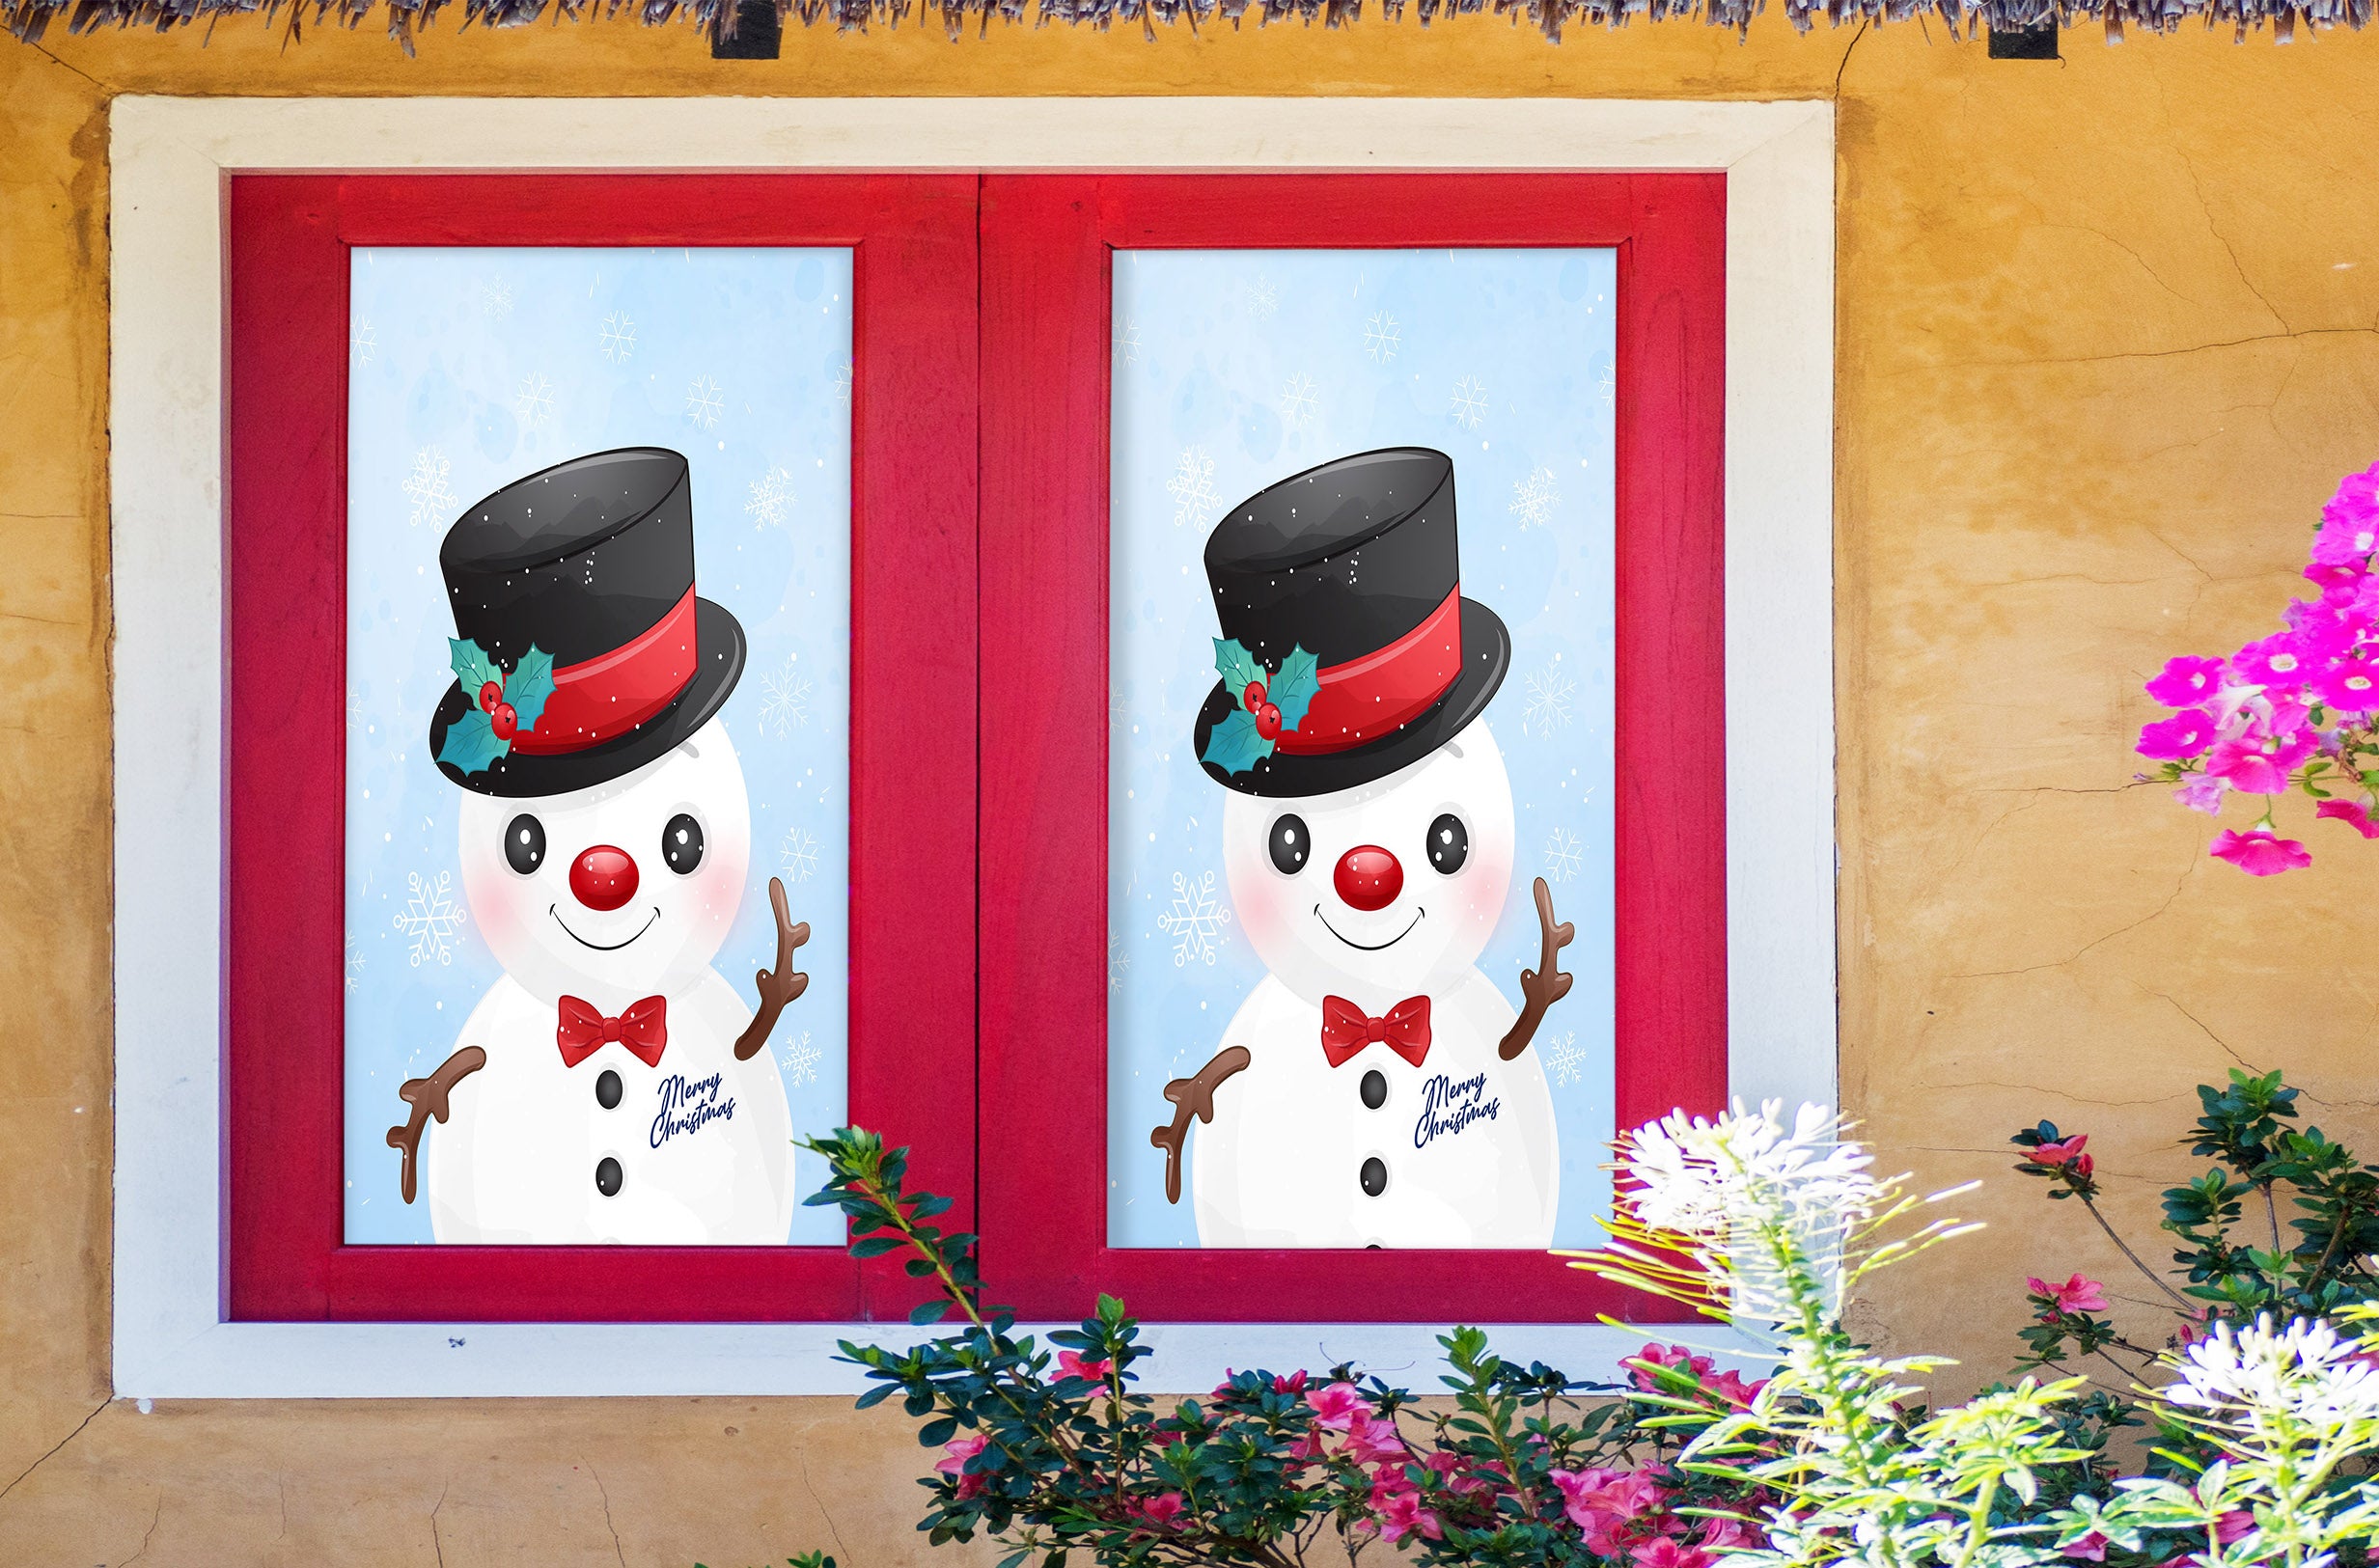 3D Snowman 43062 Christmas Window Film Print Sticker Cling Stained Glass Xmas